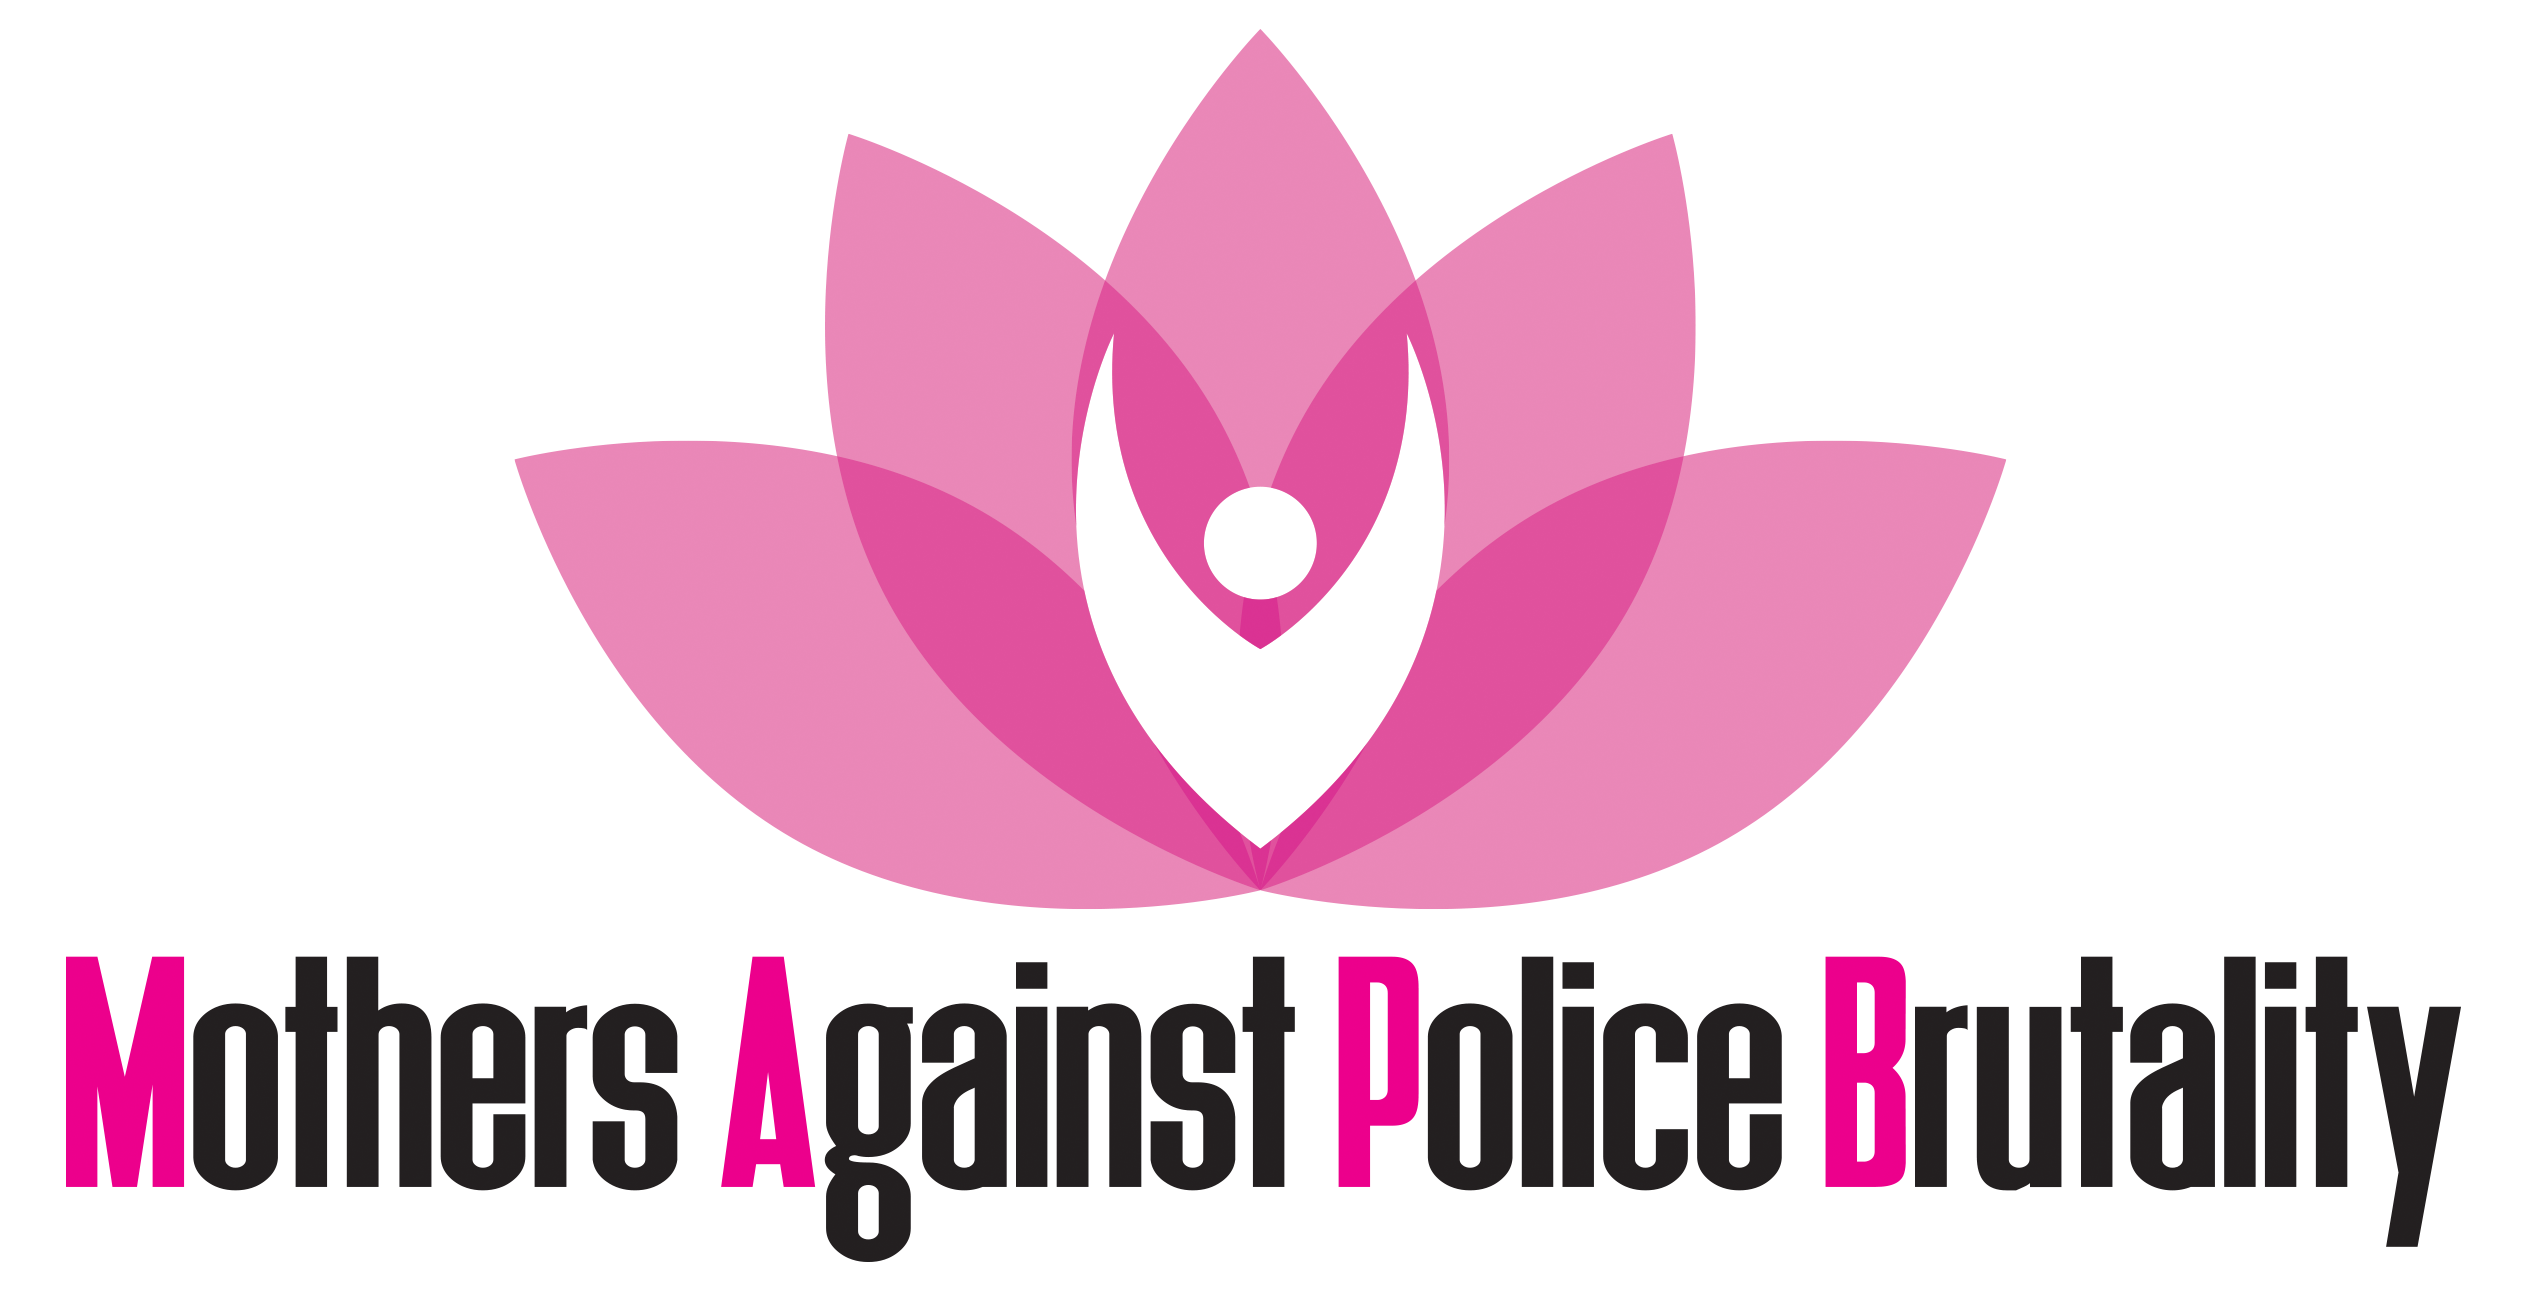 Mothers Against Police Brutality